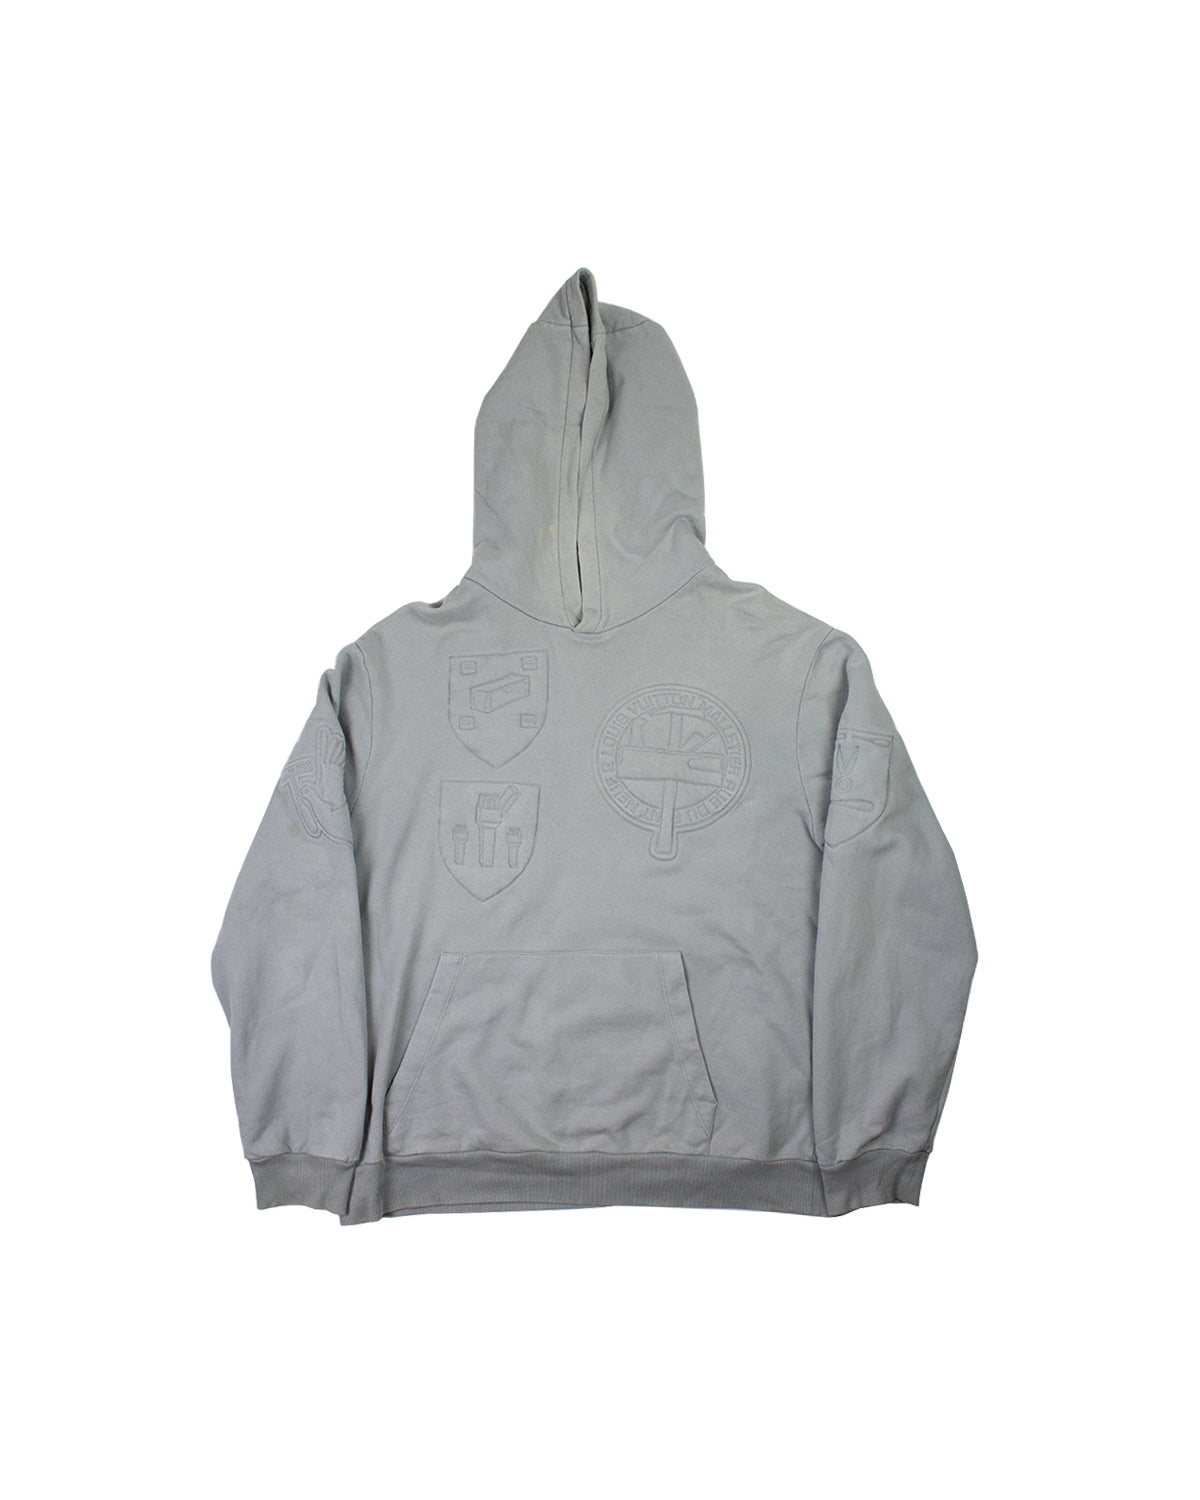 Louis Vuitton 3D embroidered hoodie virgil abloh grey 